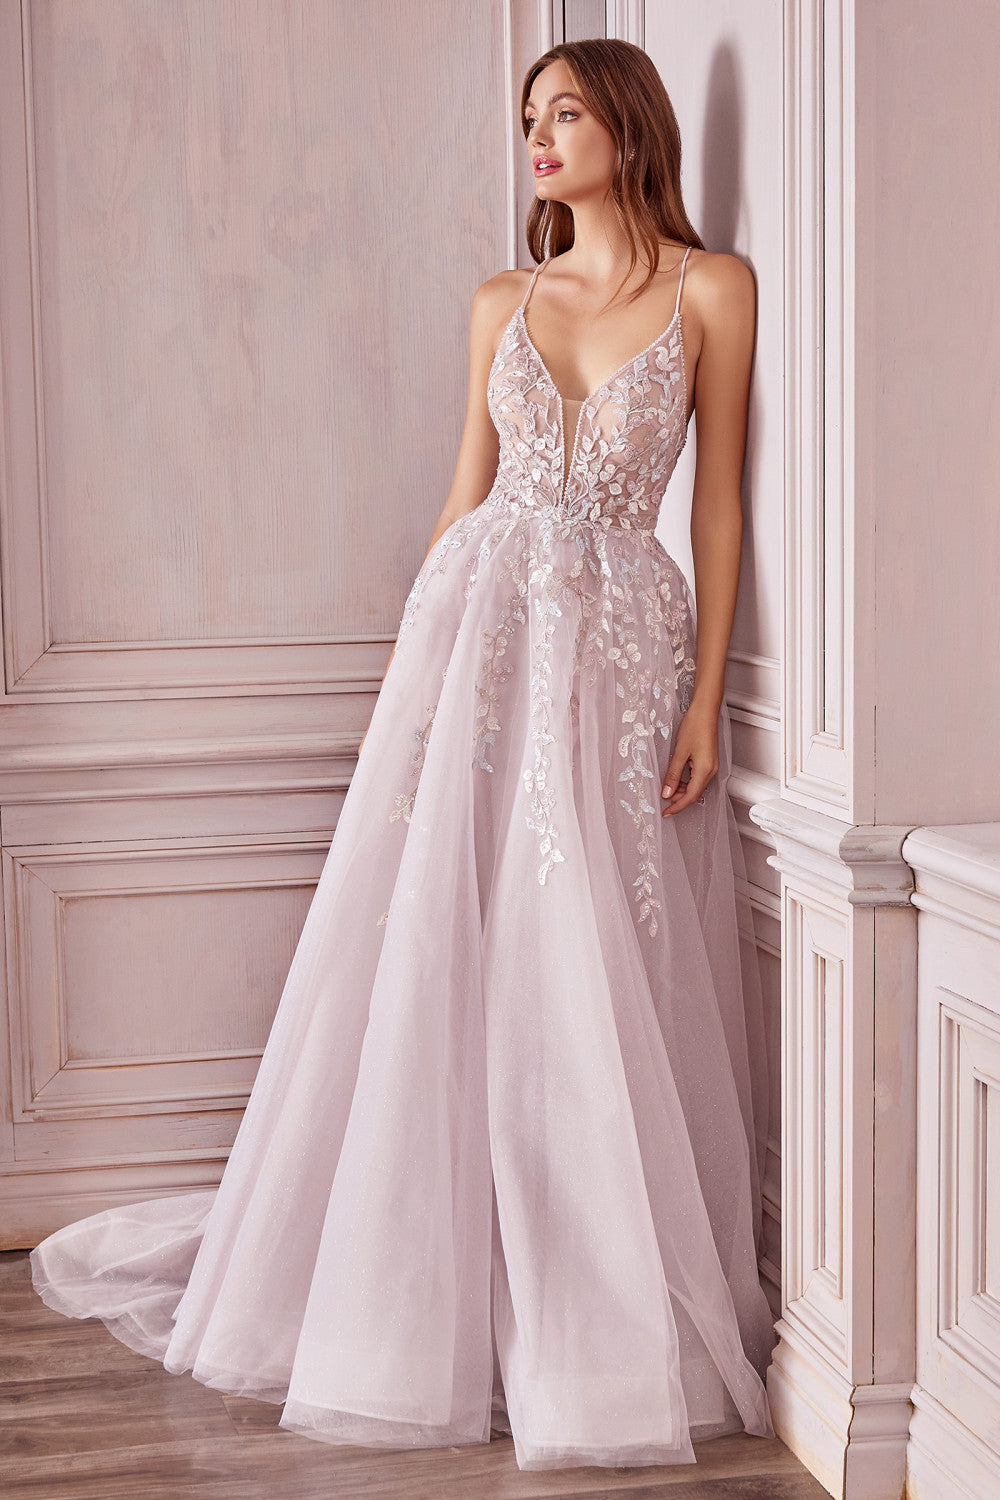 Mary Floral Lace-up Princess A-Line Gown - Andrea & Leo Couture A1019 - Special Occasion